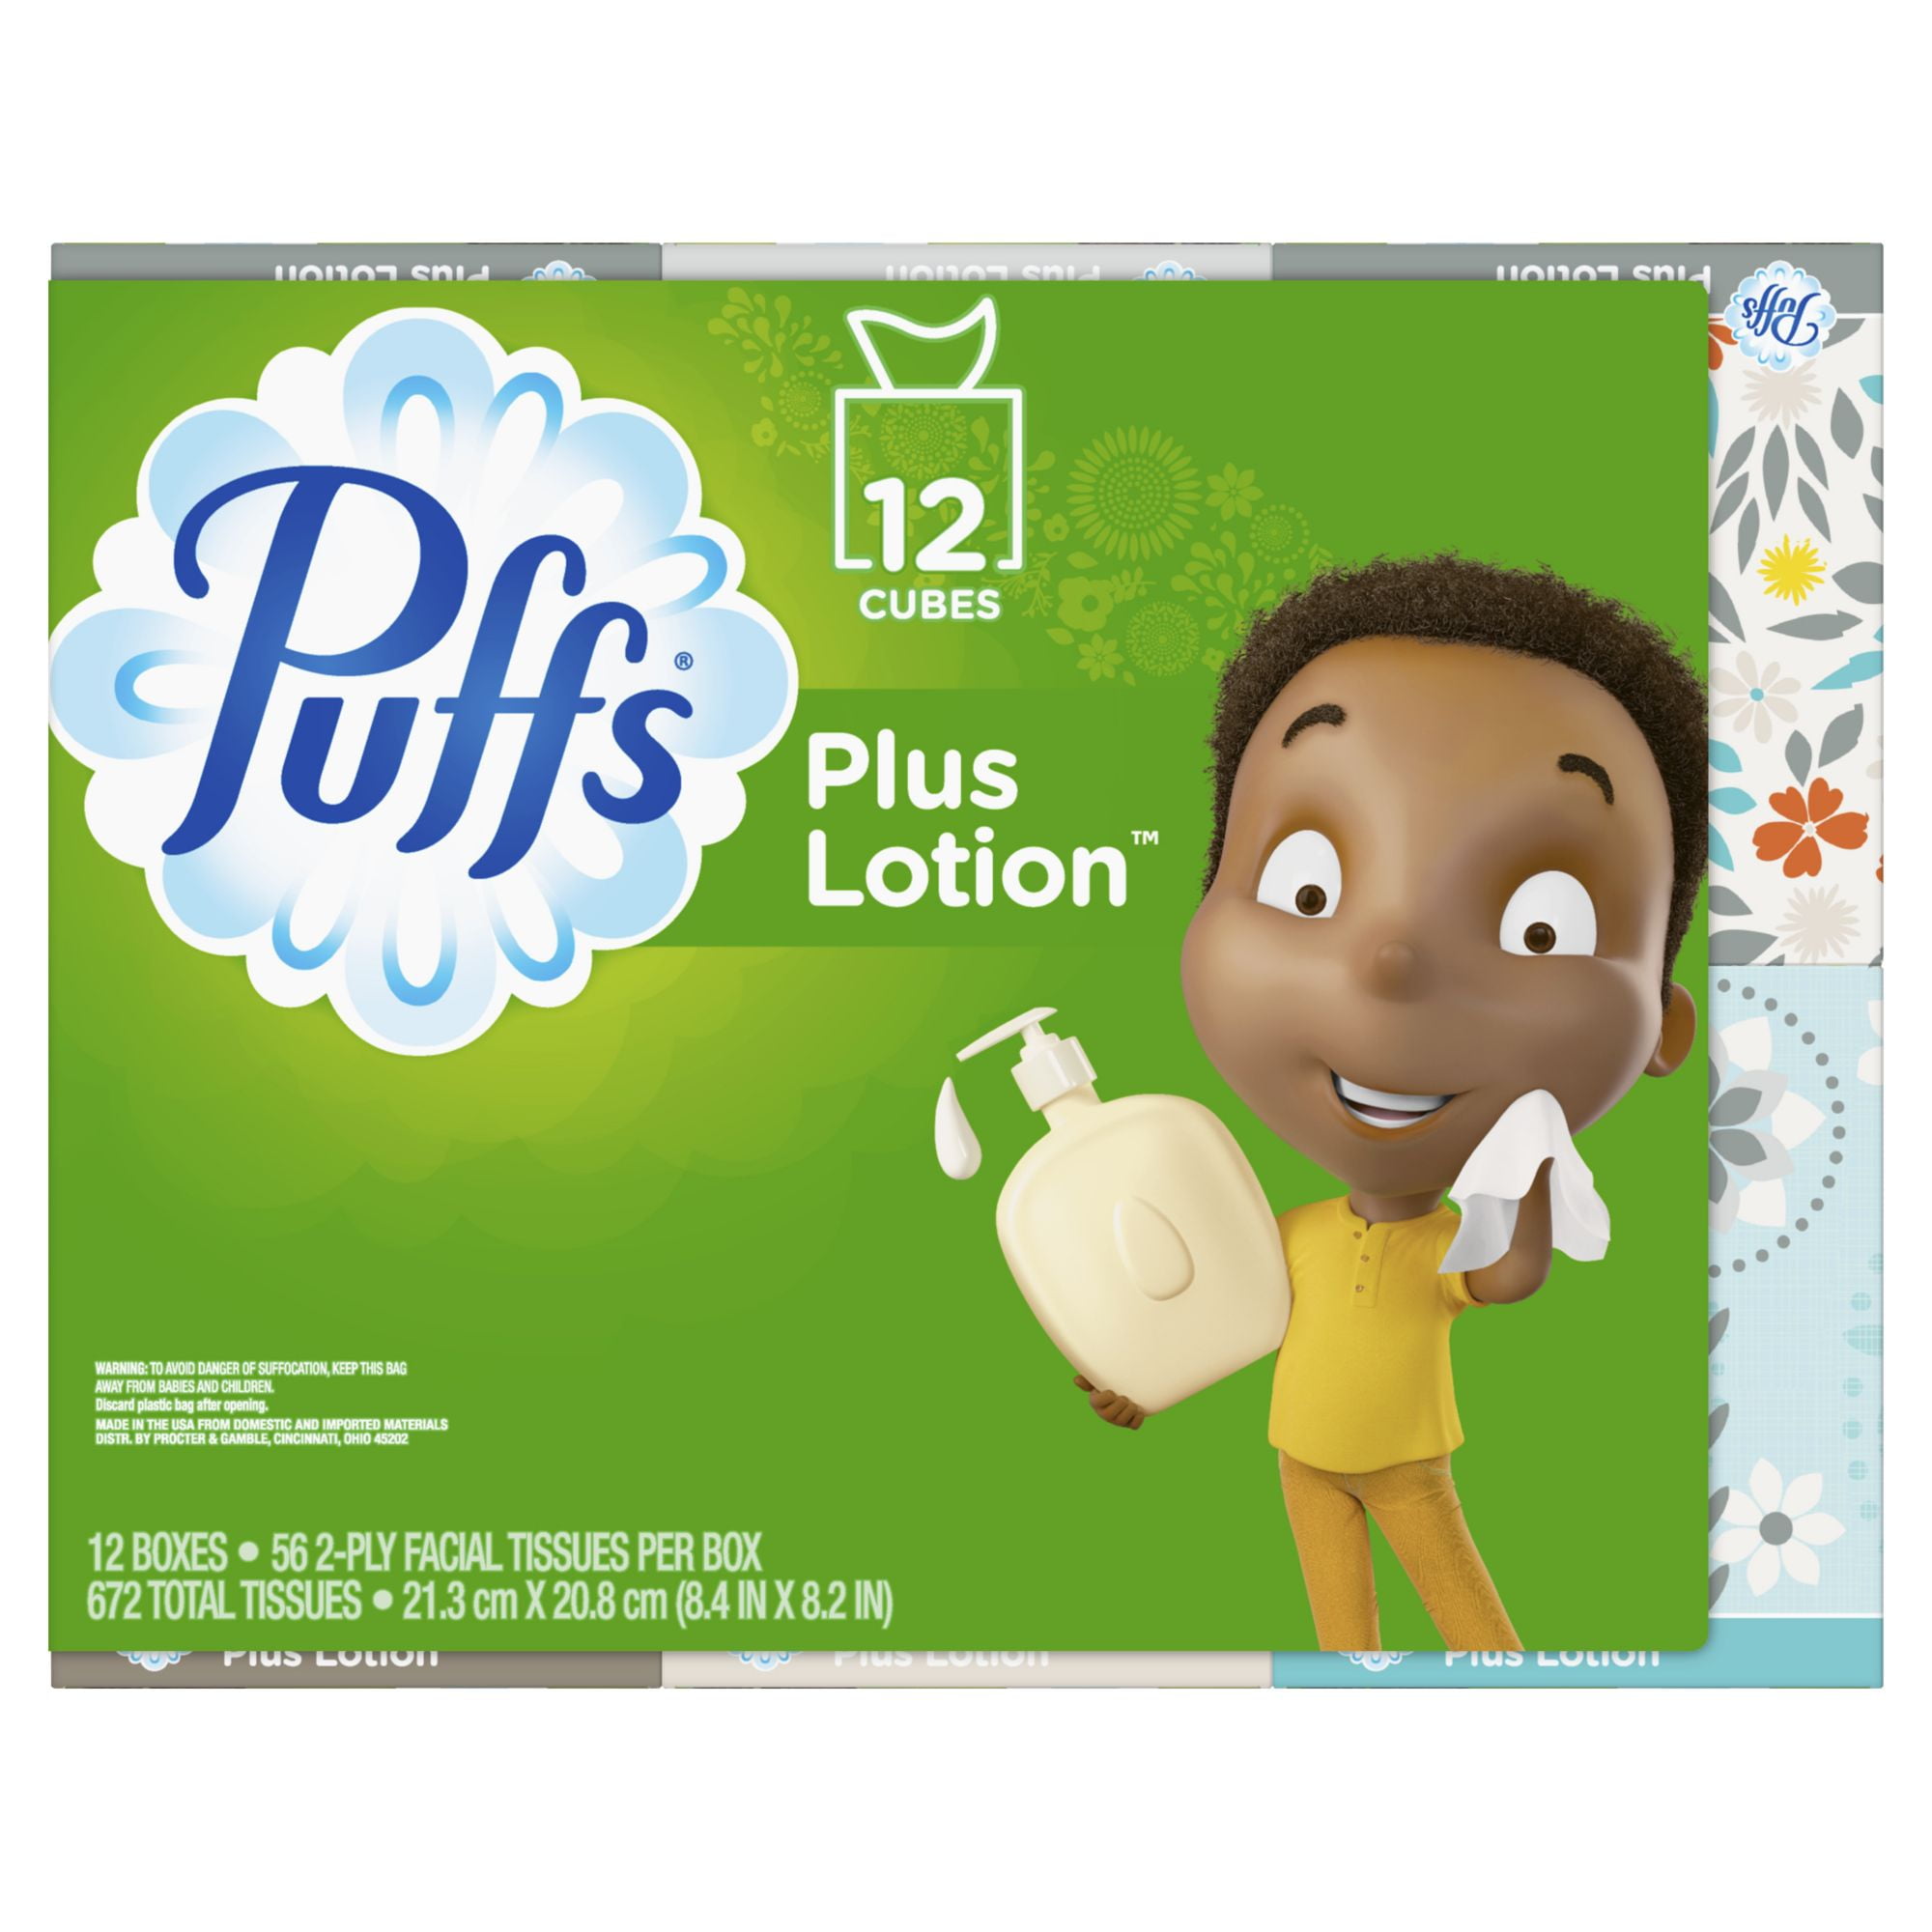 Case of Puffs plus lotion tissues - Matthews Auctioneers